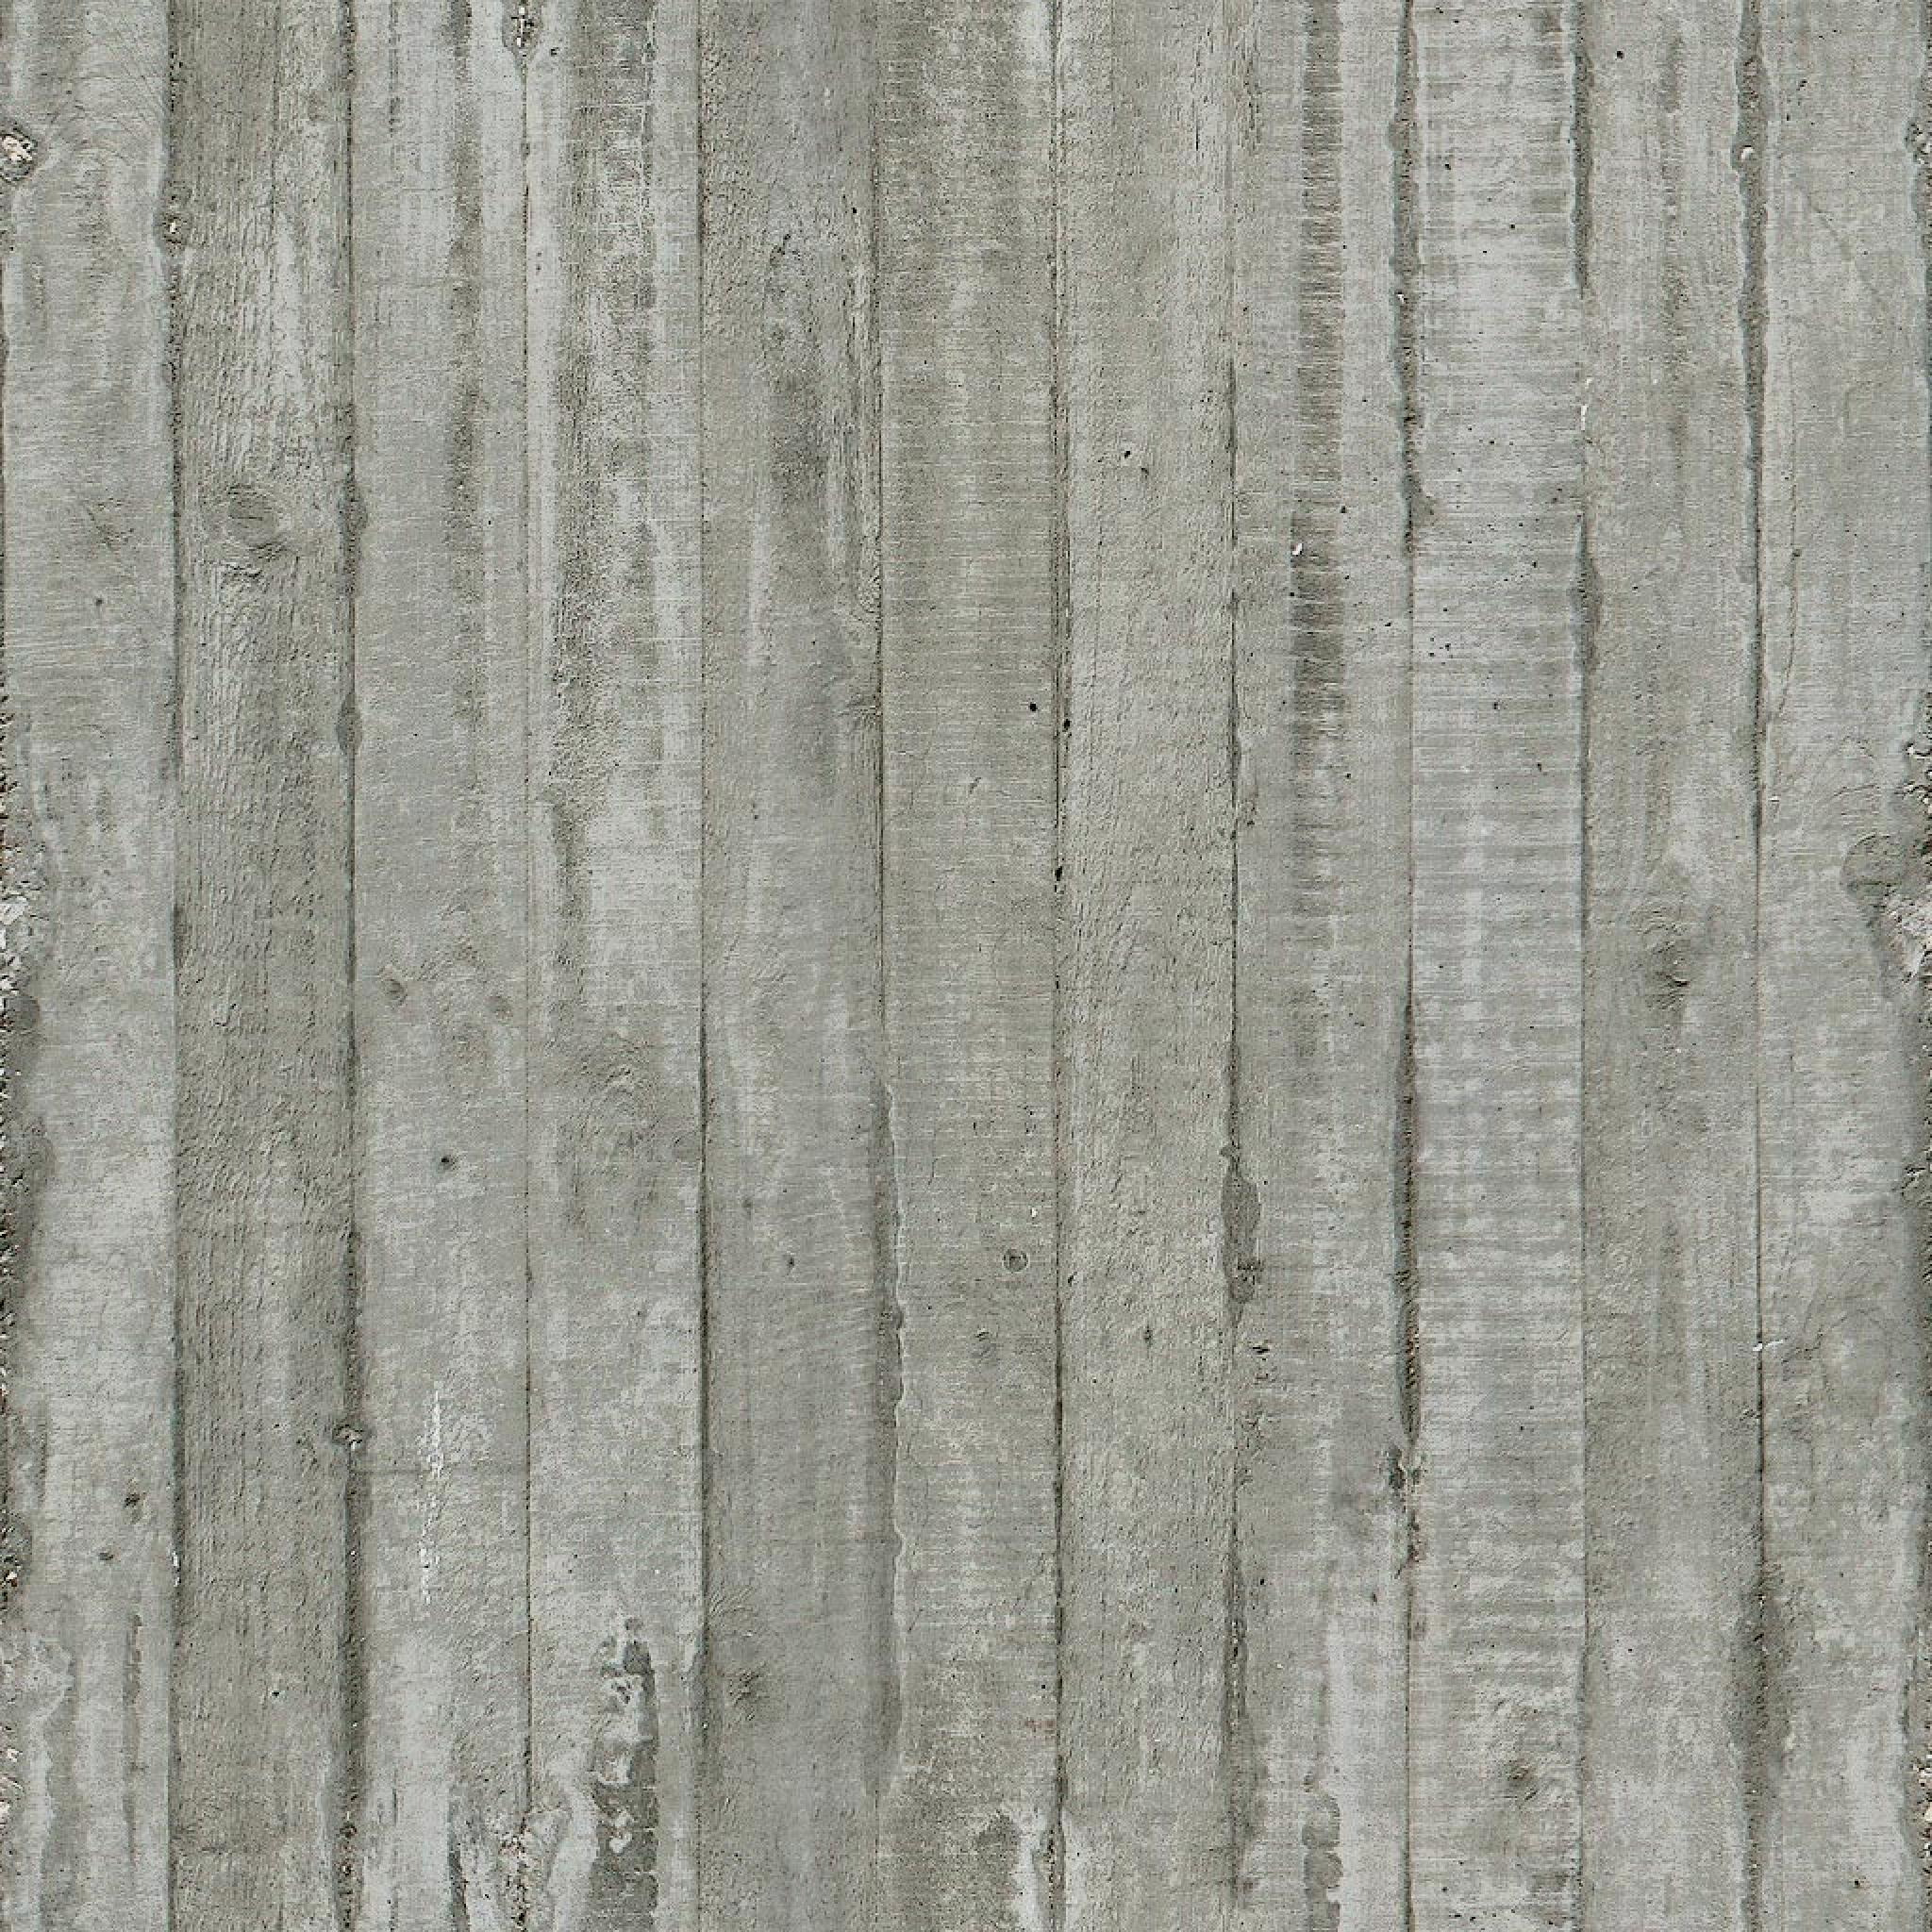 Backgrounds - Seamless Concrete Wall Texture - iPad iPhone HD ...